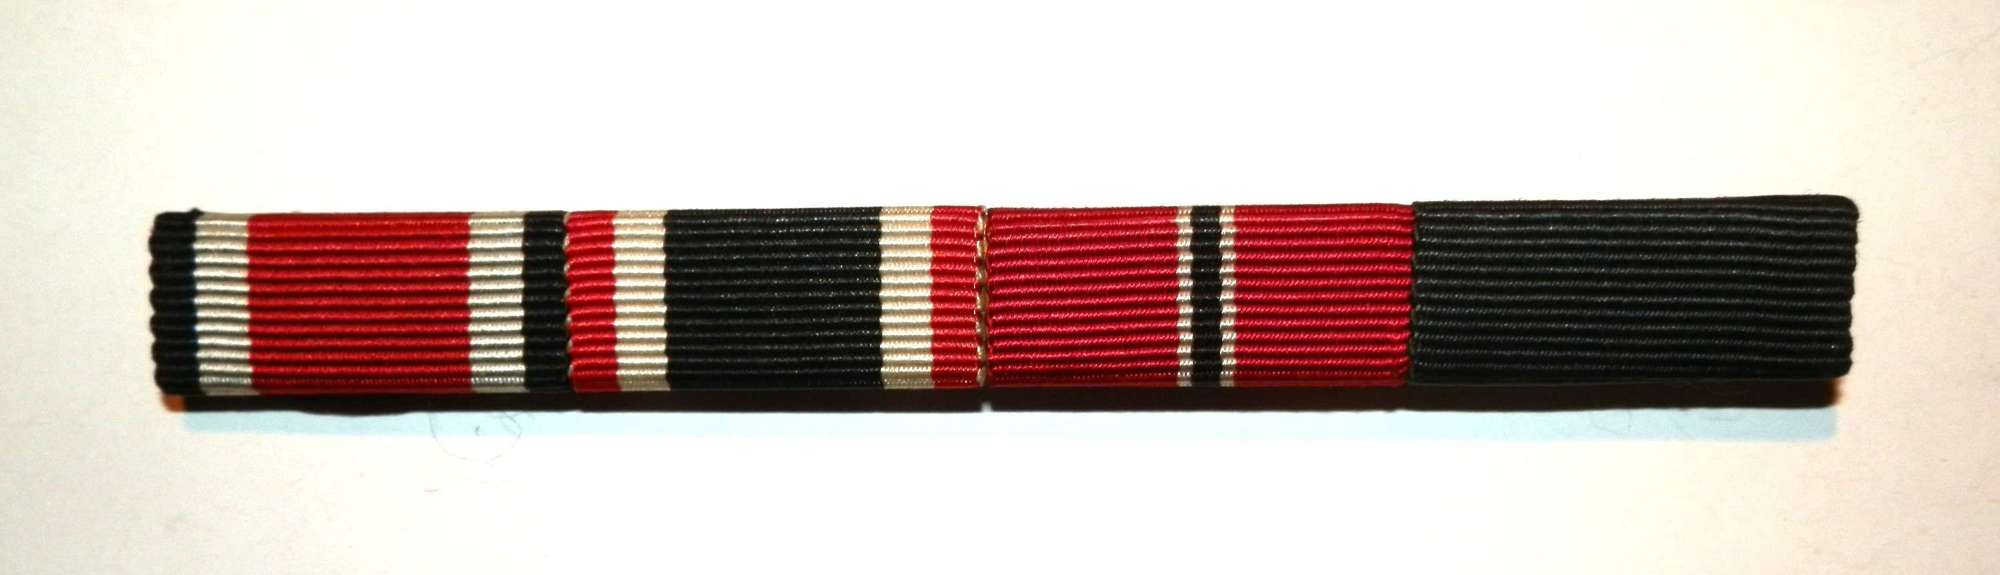 Wehrmacht Medal Ribbon Bar of Four.